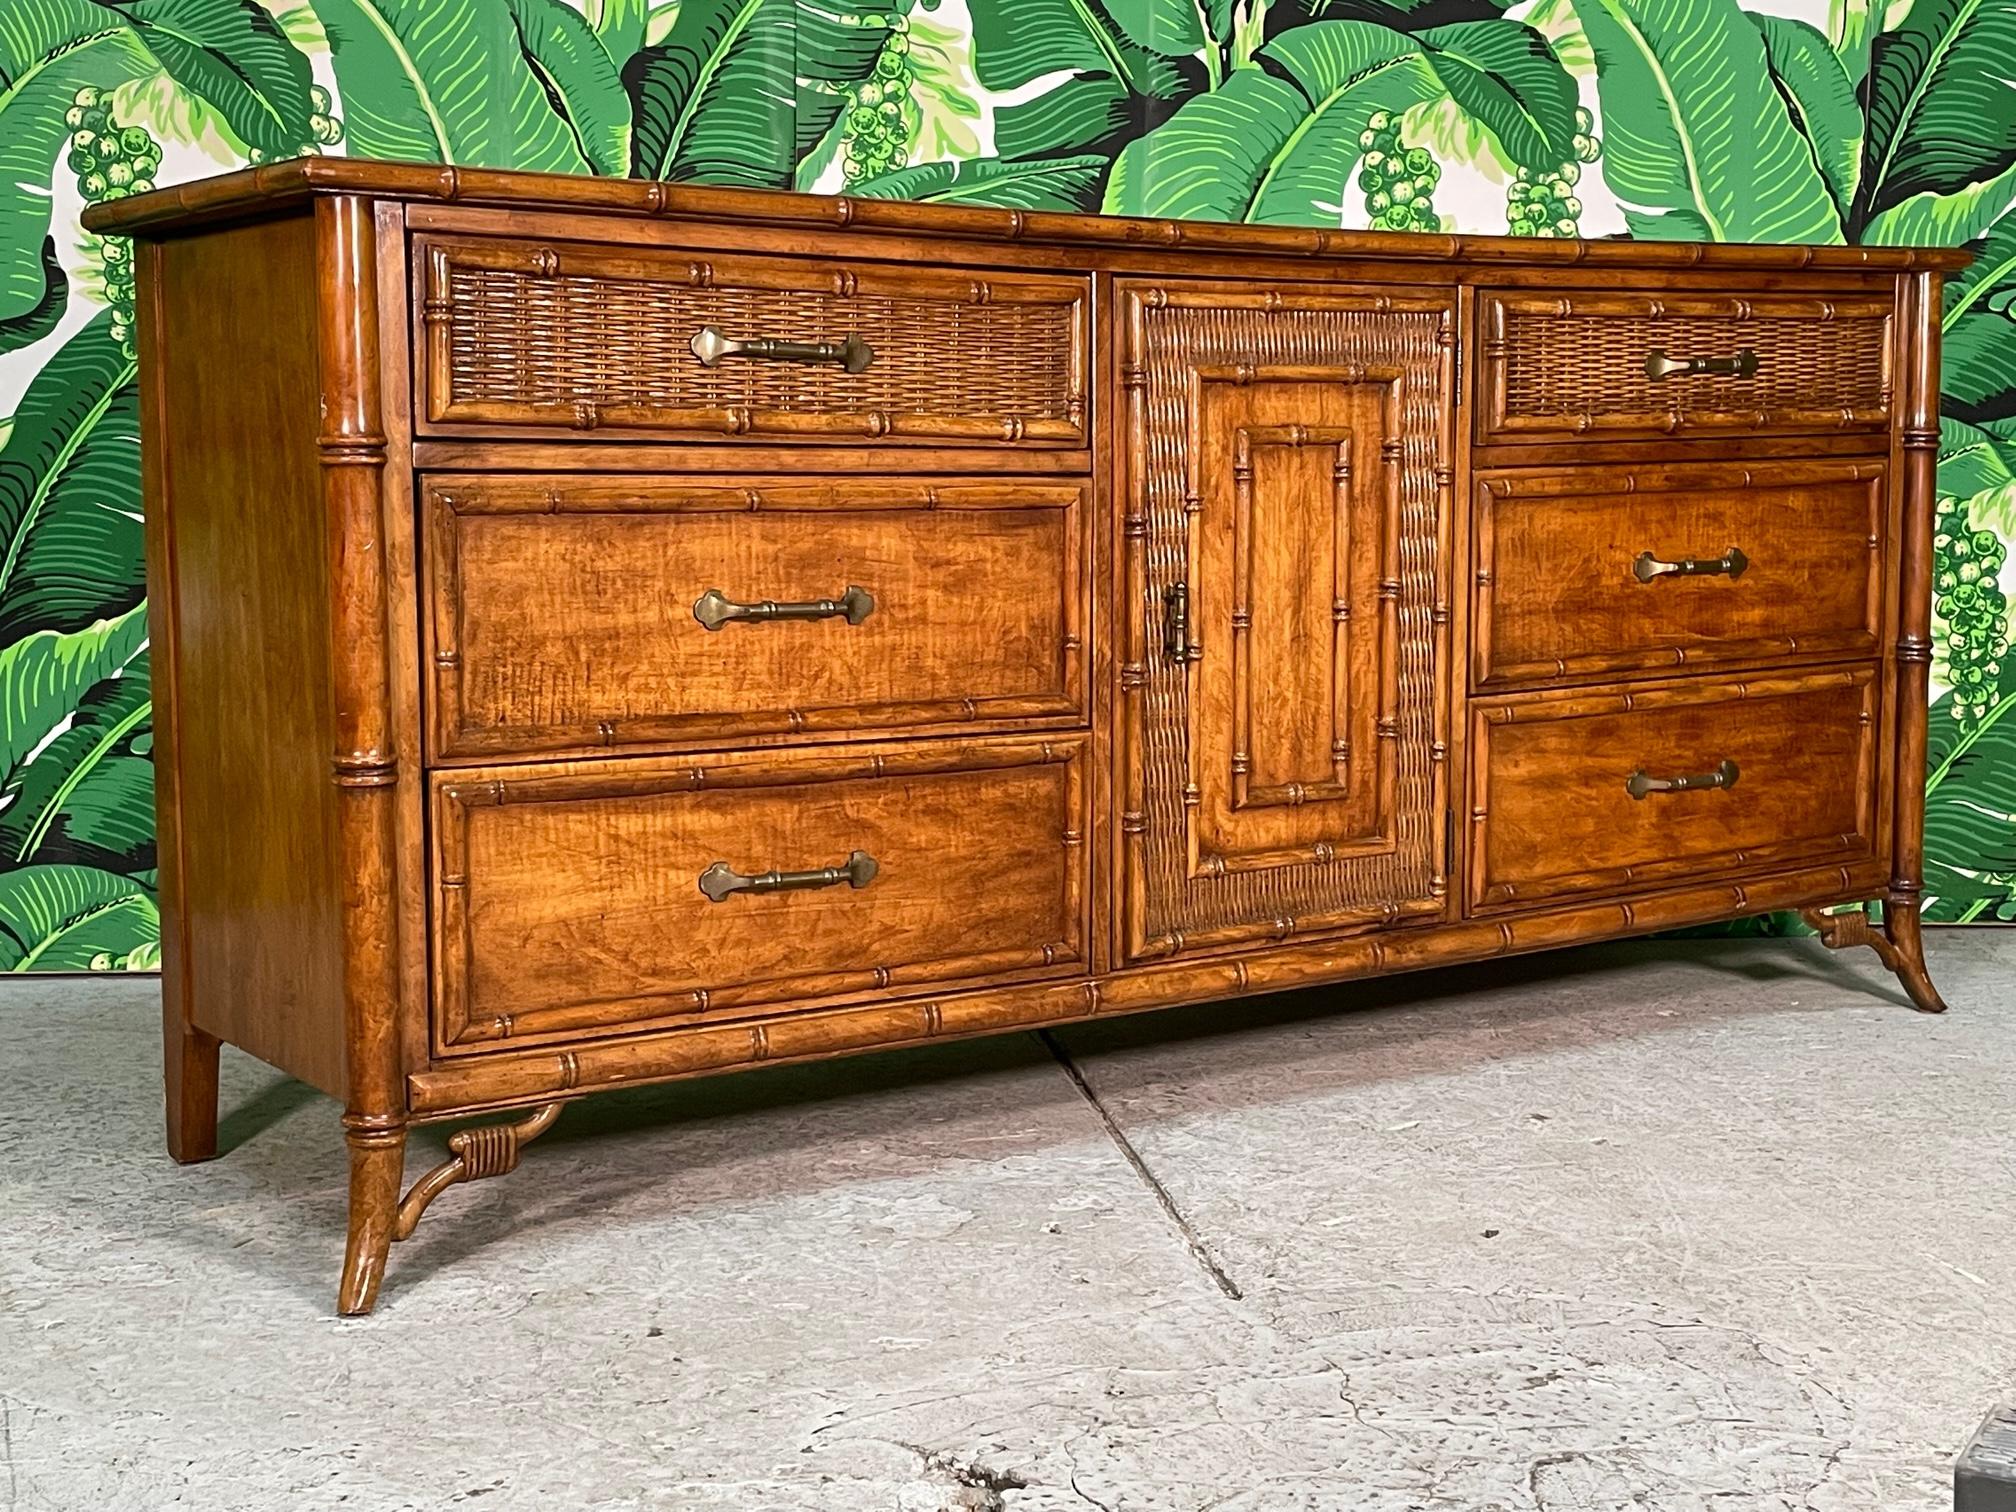 Vintage faux bamboo dresser features splayed legs, wicker veneered drawer and door fronts, and a rich, glossy finish. Good vintage condition with minor imperfections consistent with age (see photos).

 